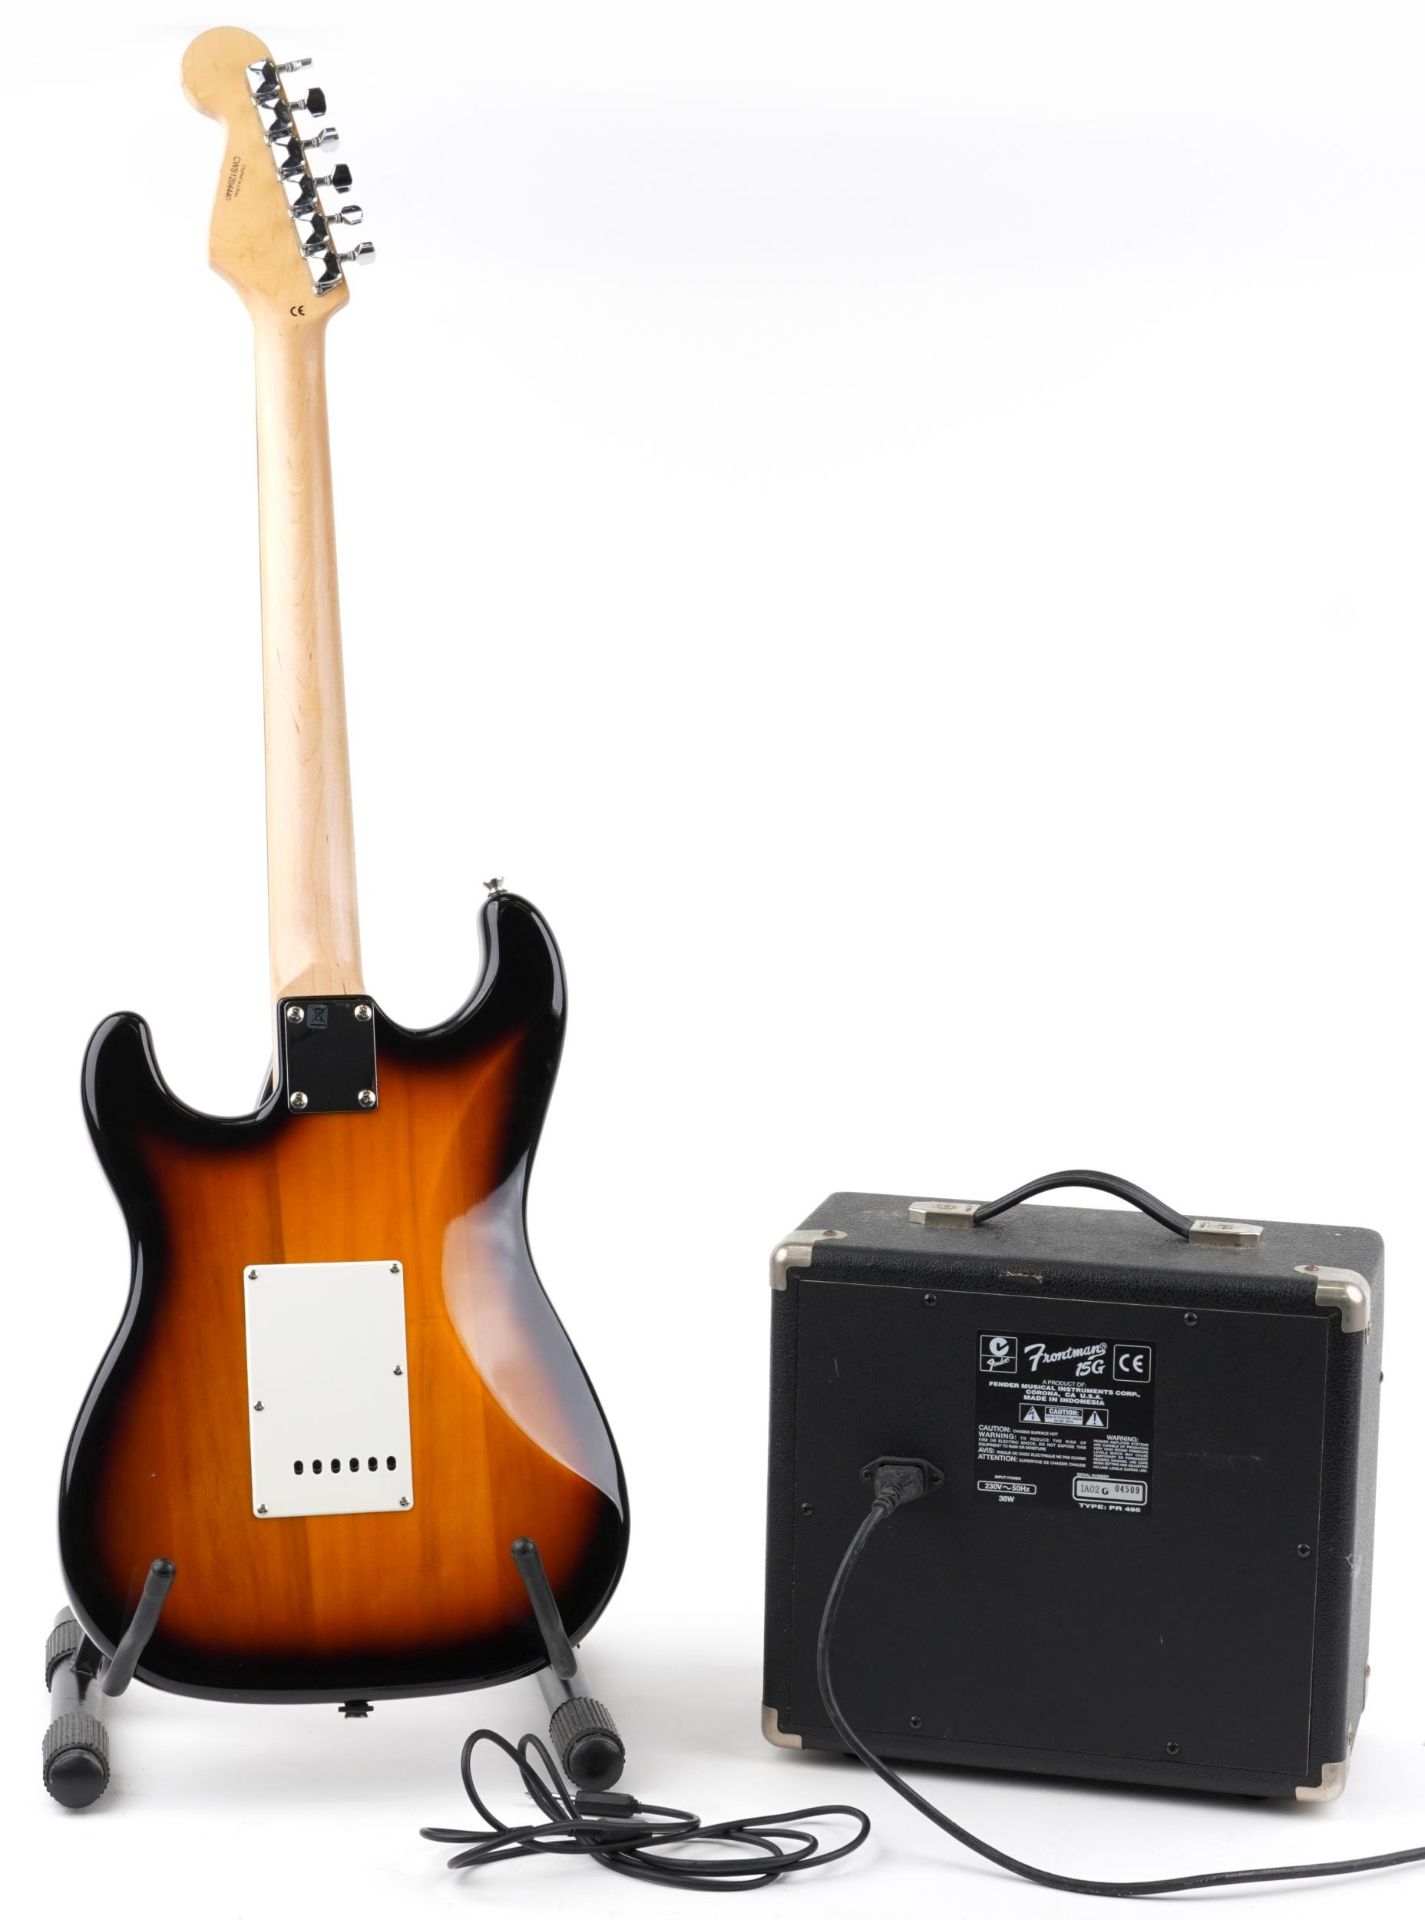 Starcaster by Fender six string electric guitar with Fender Front Man 15G amplifier and stand, the - Bild 2 aus 4